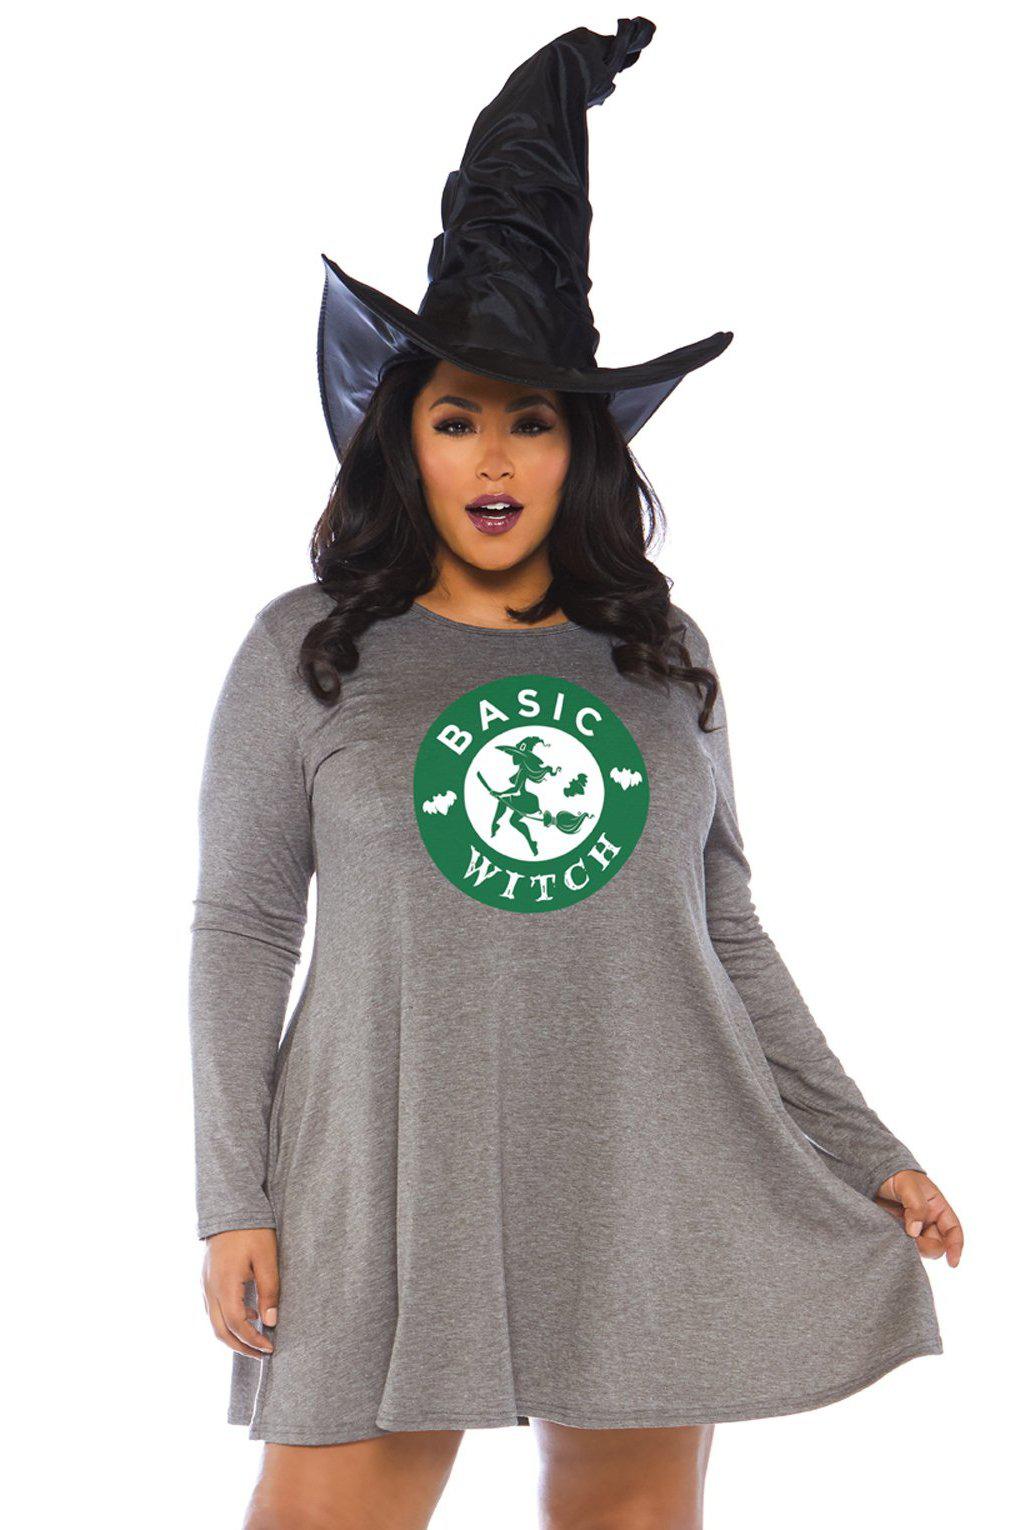 Plus Size Basic Witch Jersey Dress-Witch Costumes-Leg Avenue-Grey-1/2XL-SEXYSHOES.COM